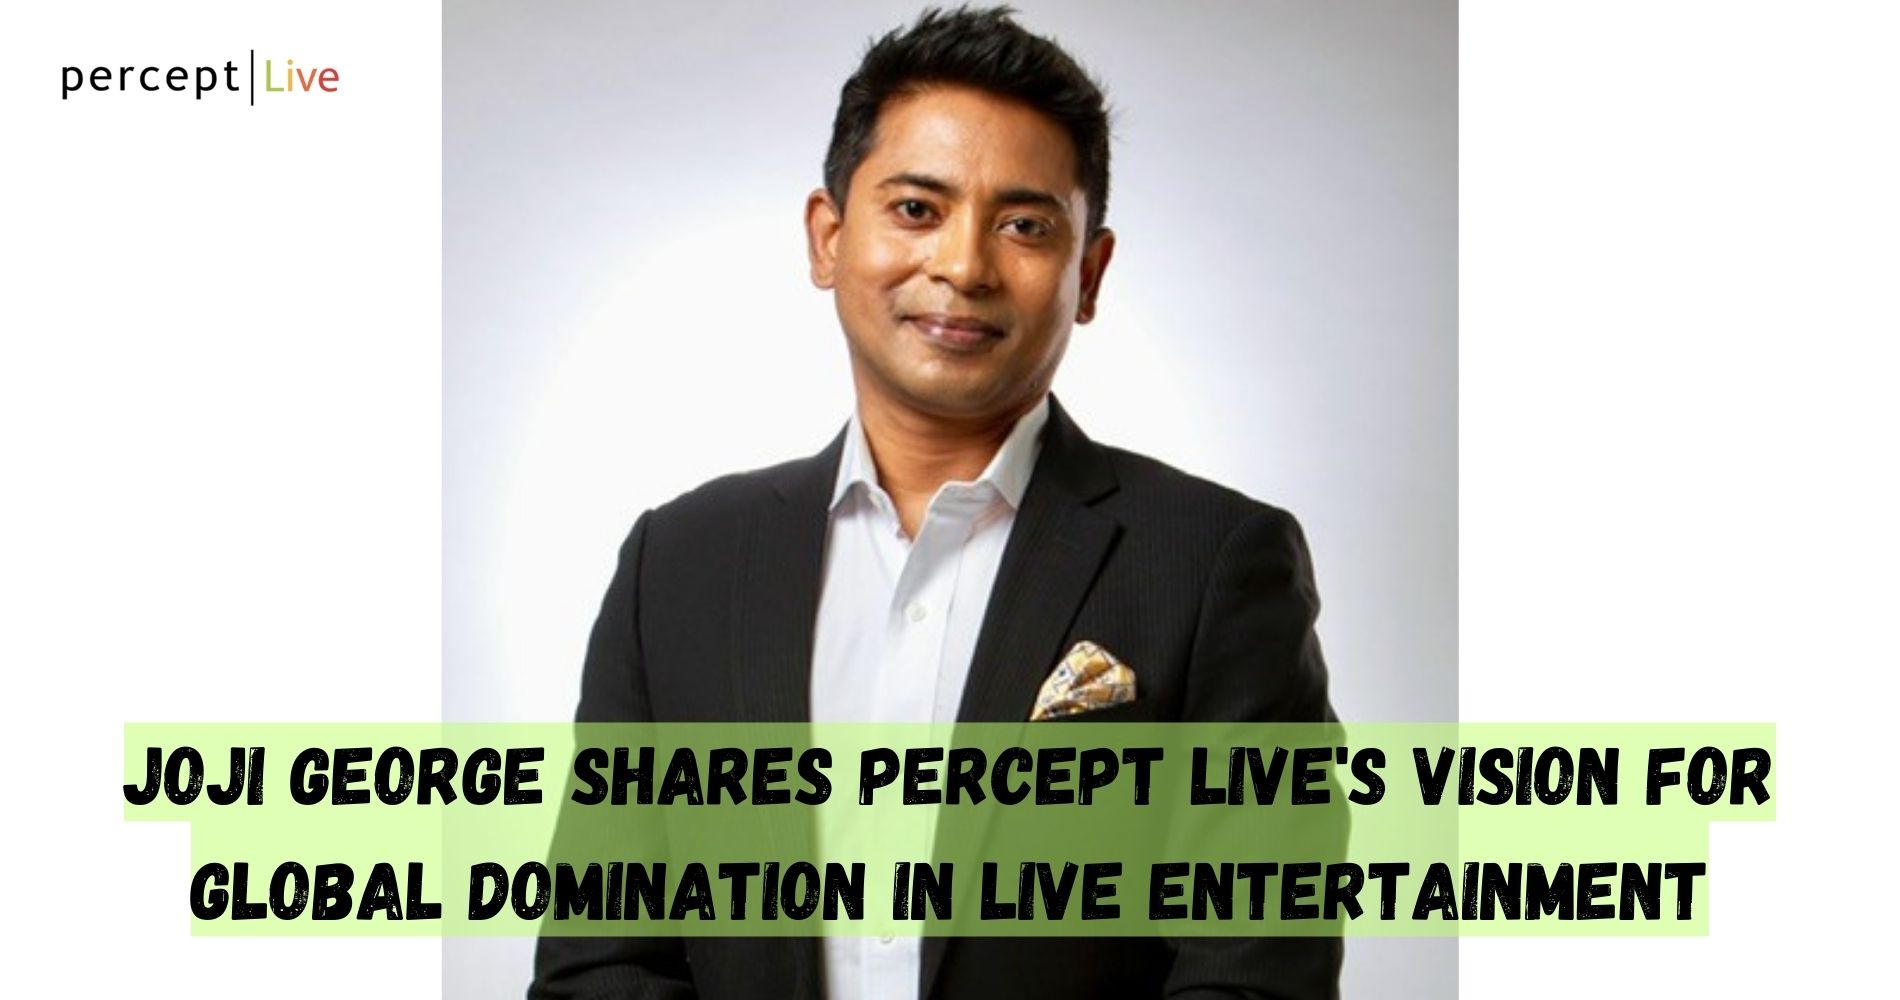 Joji George Shares Percept Live's Vision For Global Domination In Live Entertainment